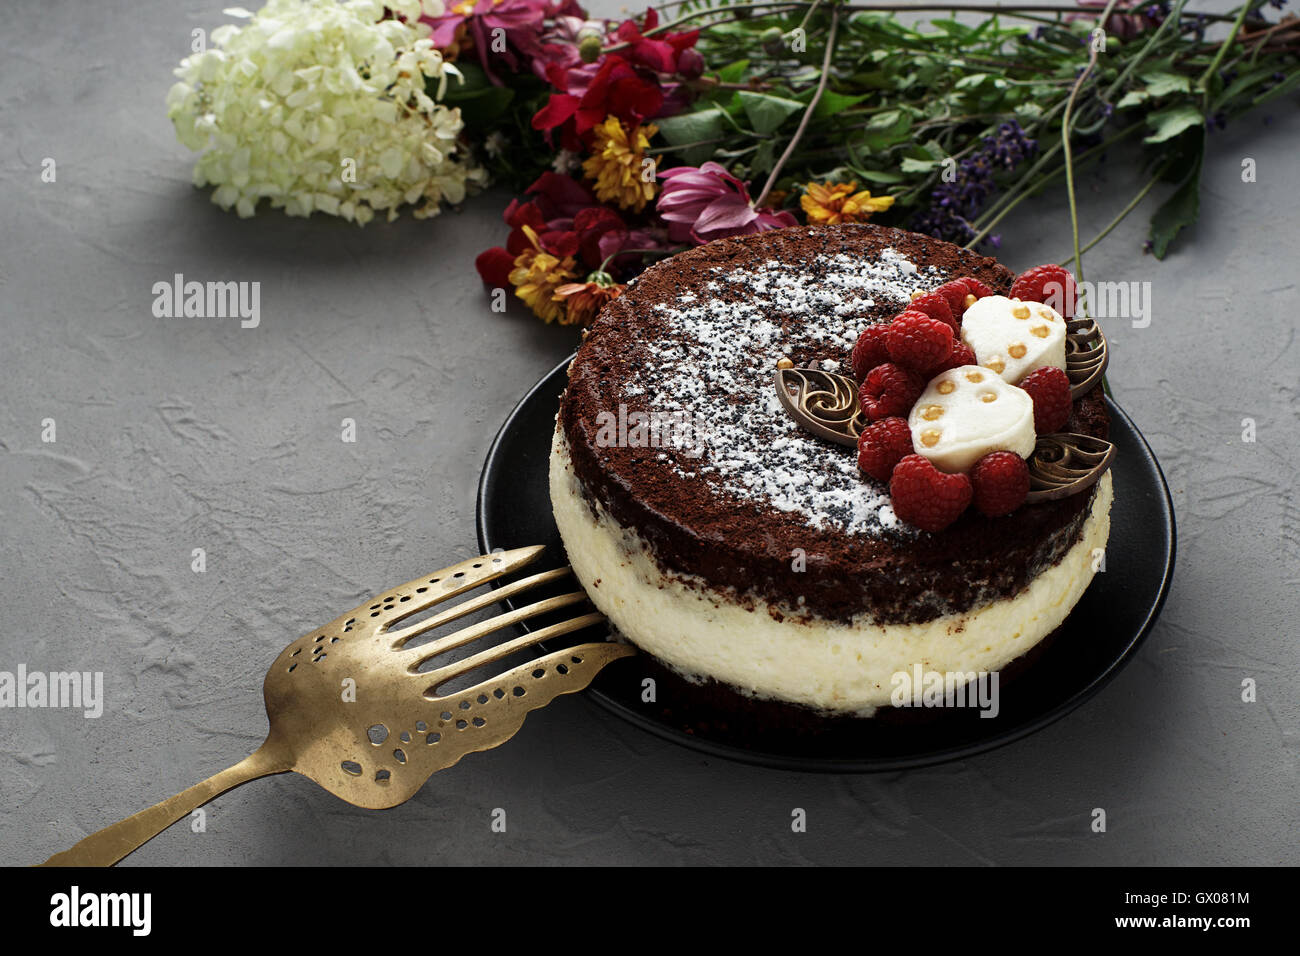 Sweet and delicious compliment to holiday and birthday, will delight you with simplicity and splendor. Stock Photo